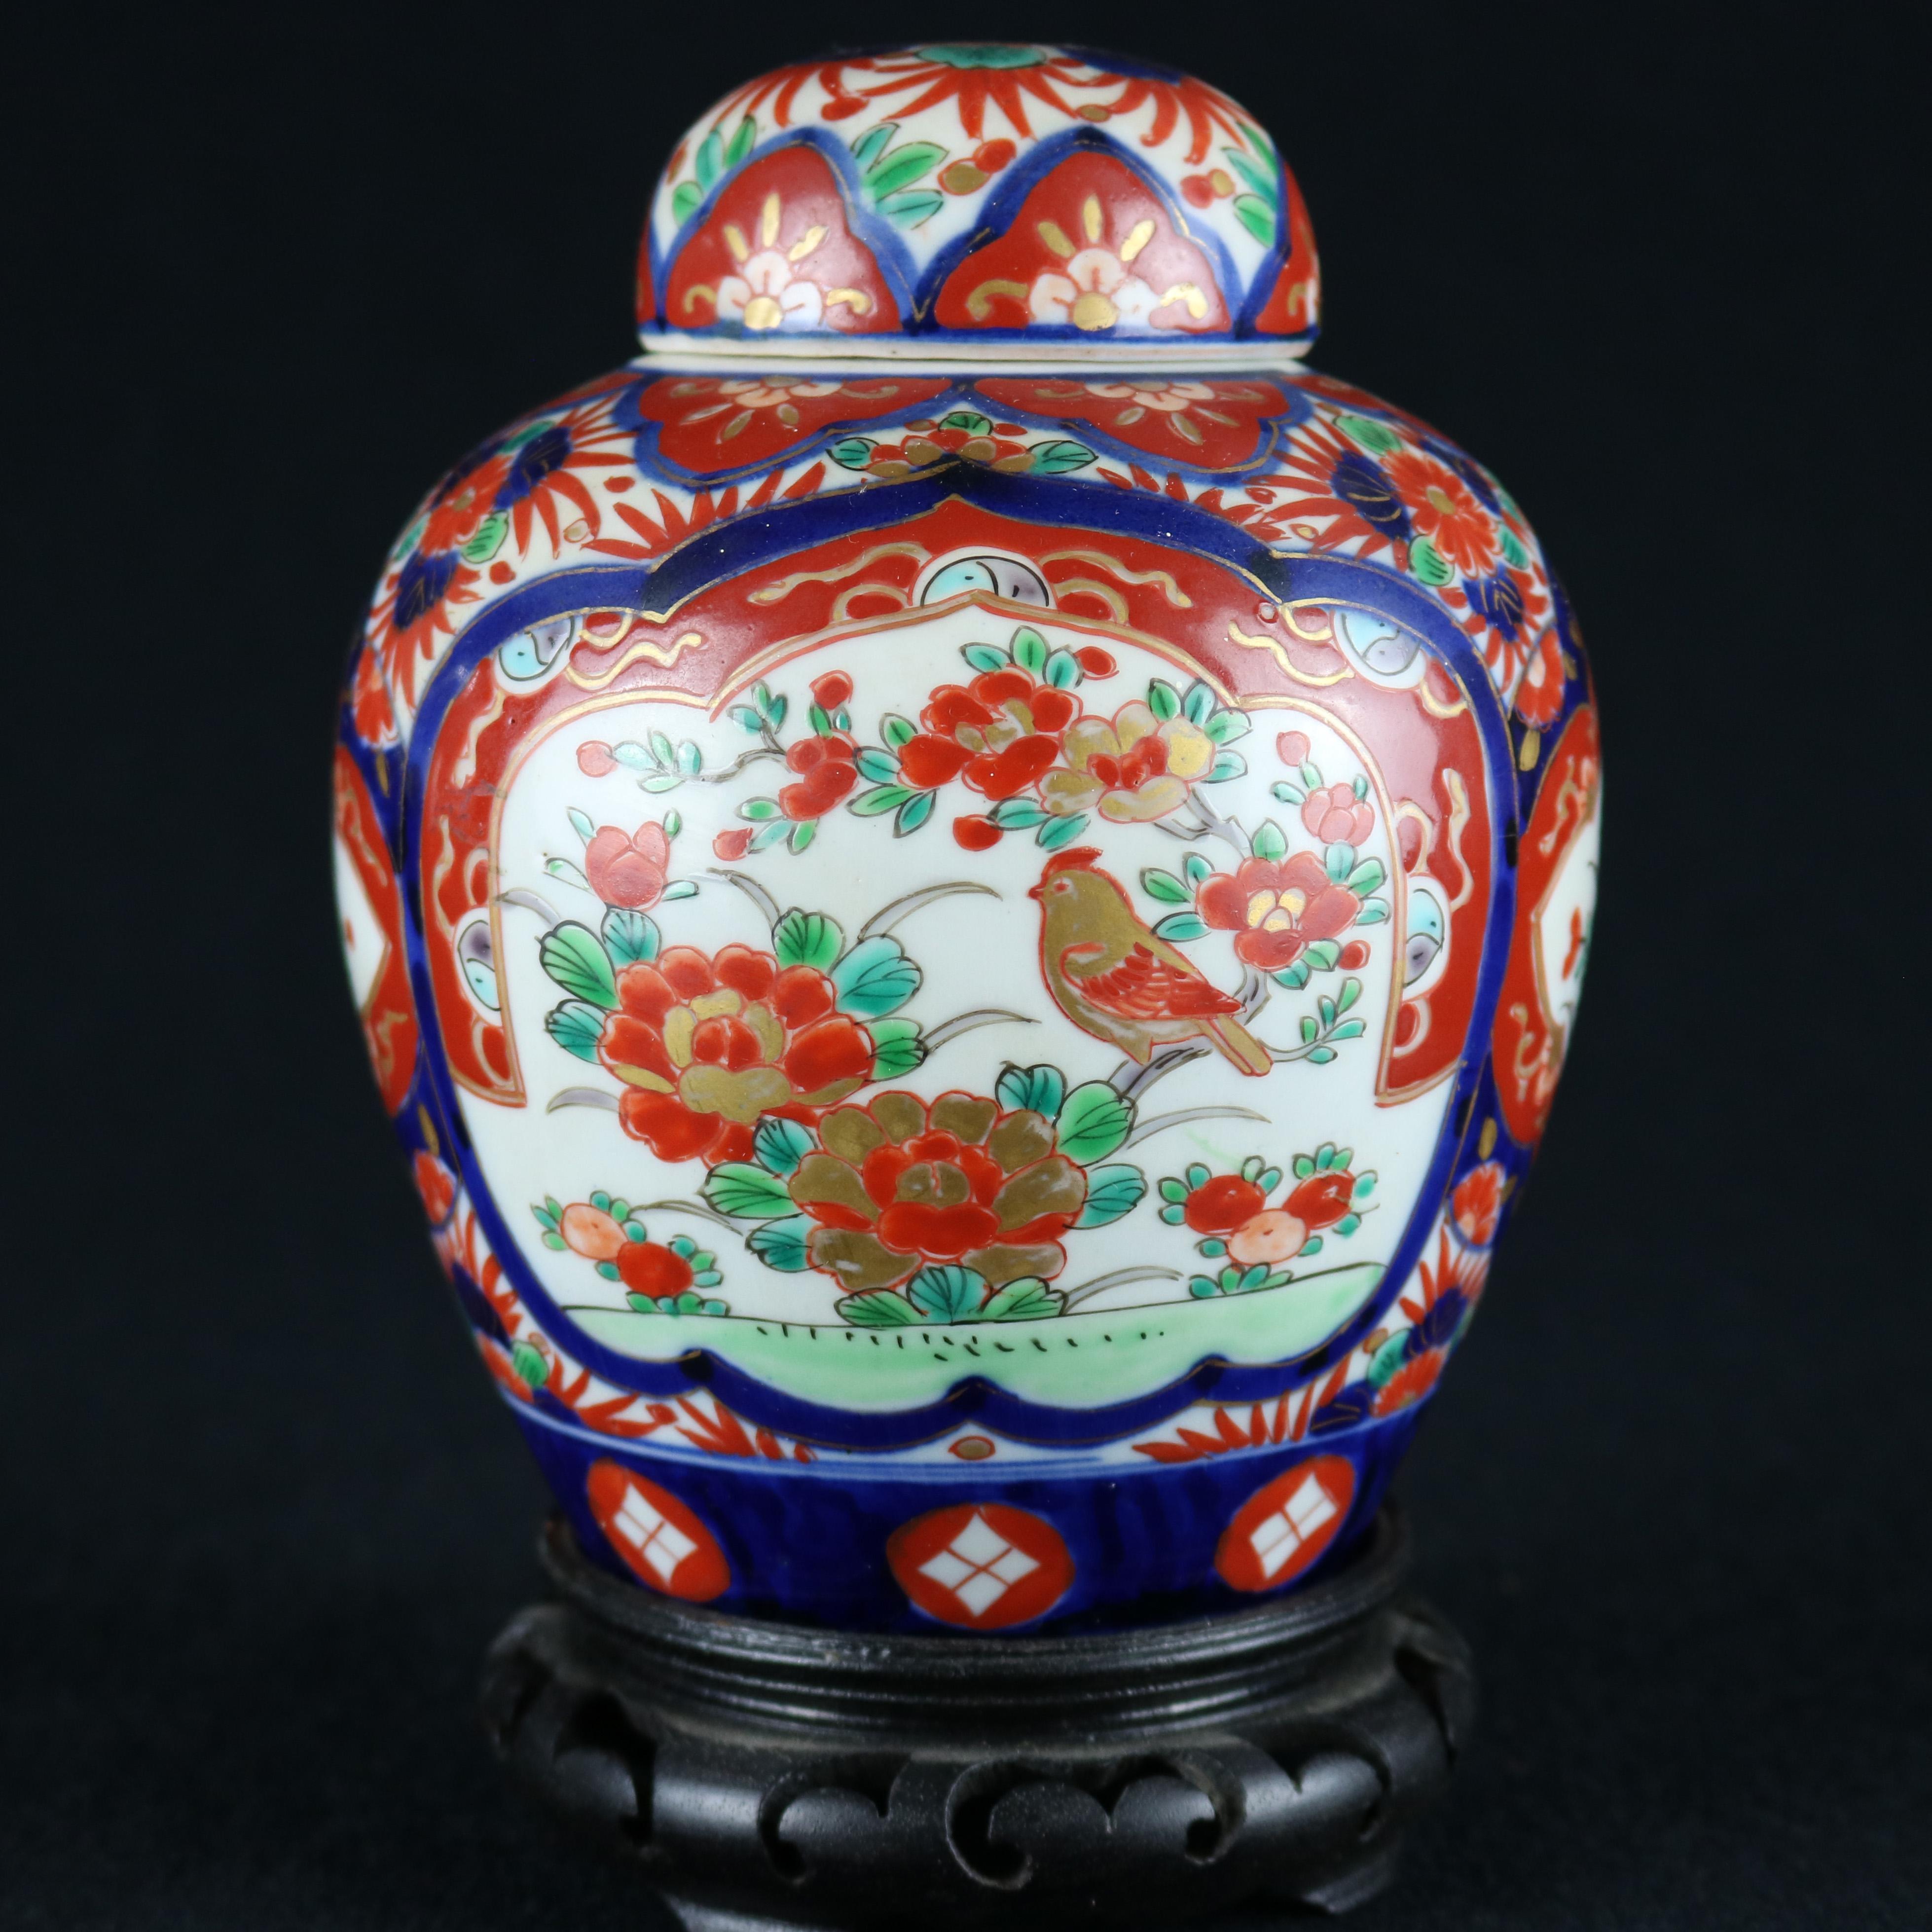 A vintage Japanese Imari covered ginger jar offers porcelain construction with hand enameled decoration including reserves with floral elements, seated on ebonized carved hardwood base, stamped Made in Japan on base, 20th century.

Measures: 7.25